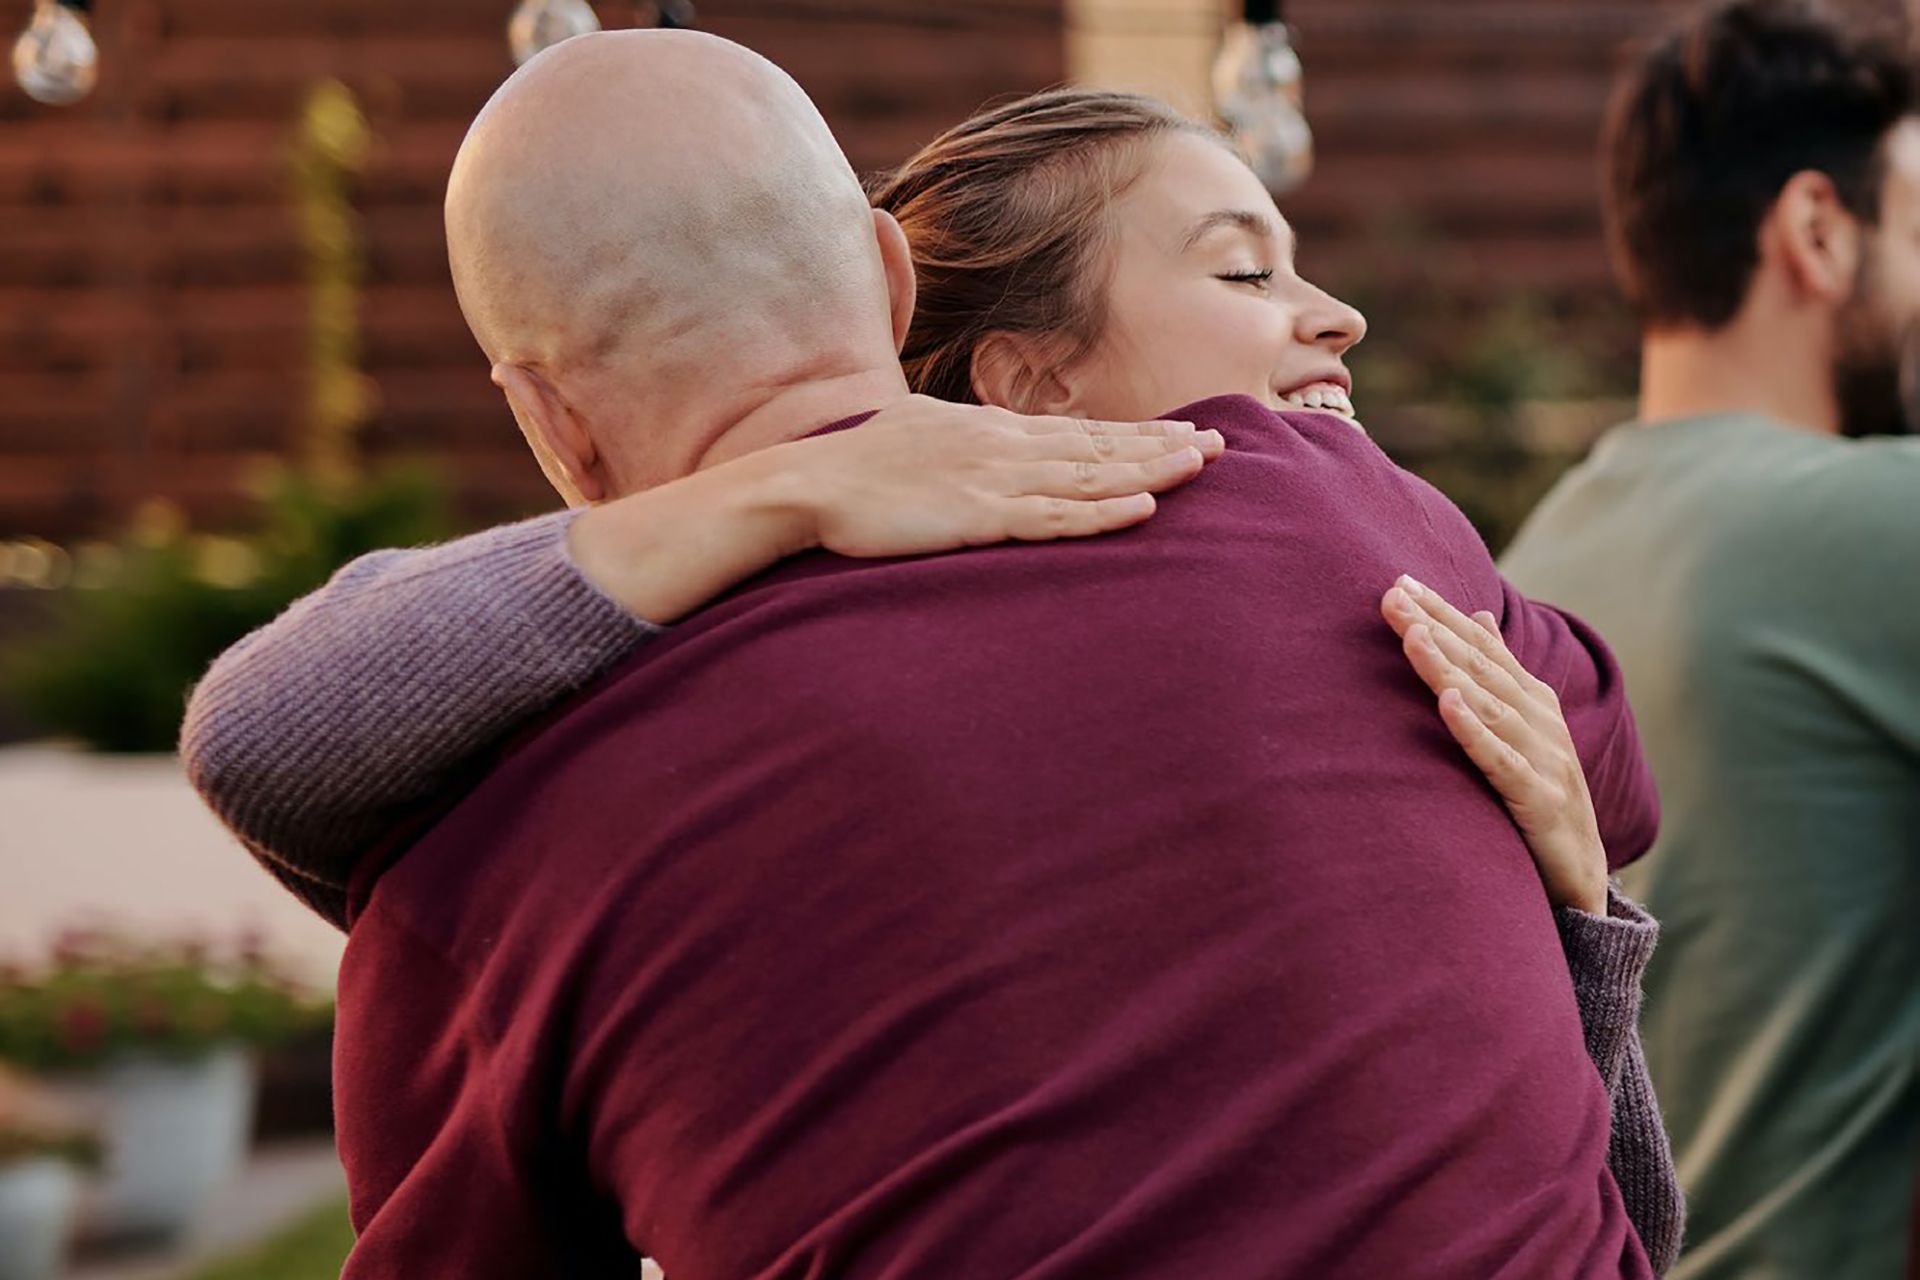 a woman in a purple shirt is hugging a bald man